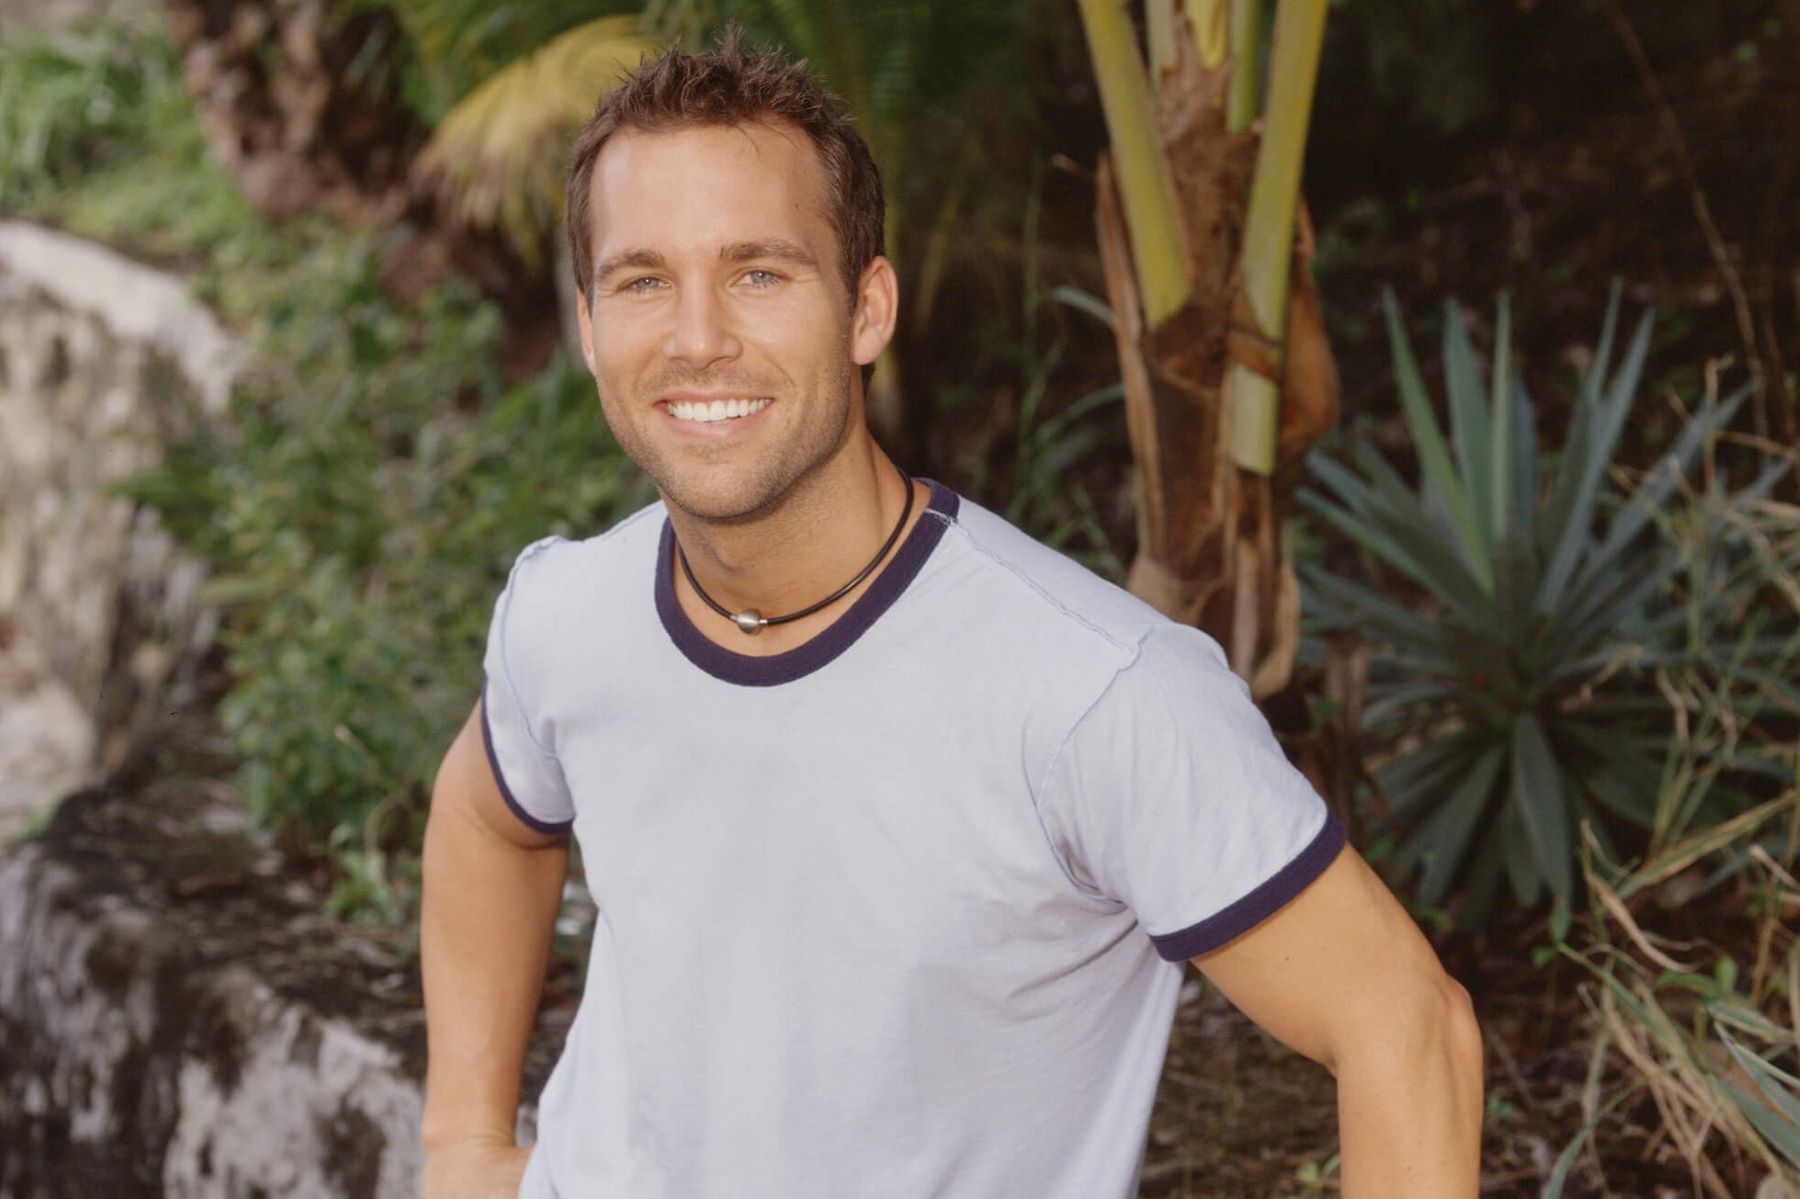 Colby Donaldson, a contestant from 'Survivor' on CBS, wears a light gray t-shirt and leans against a rock wall.